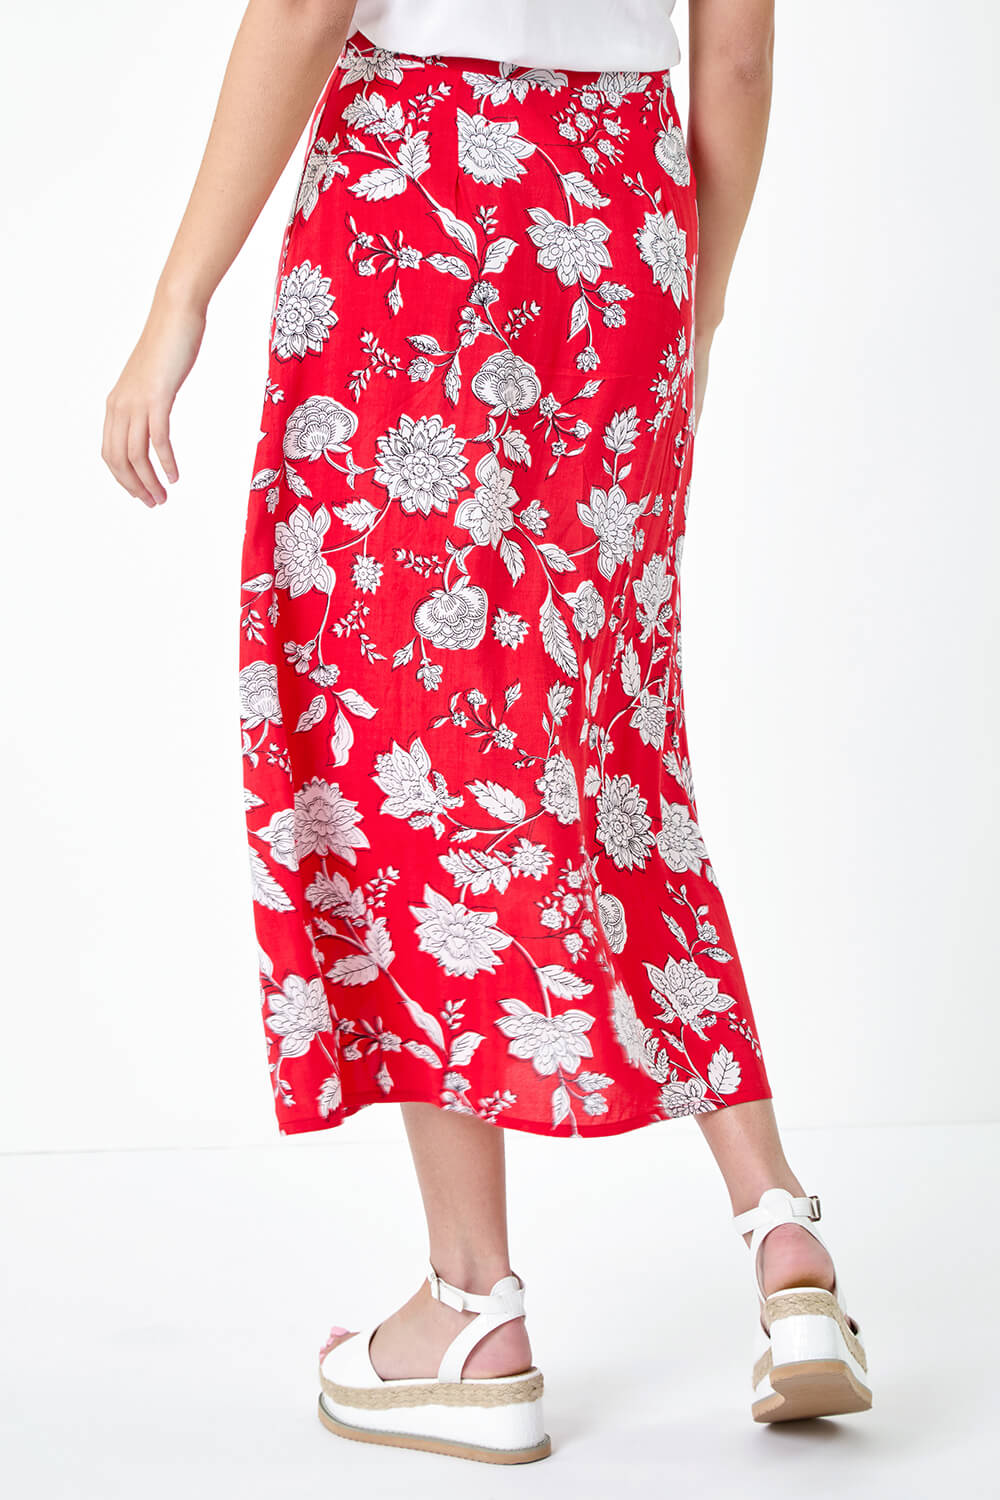 CORAL Floral Button Detail Midi Skirt, Image 4 of 5